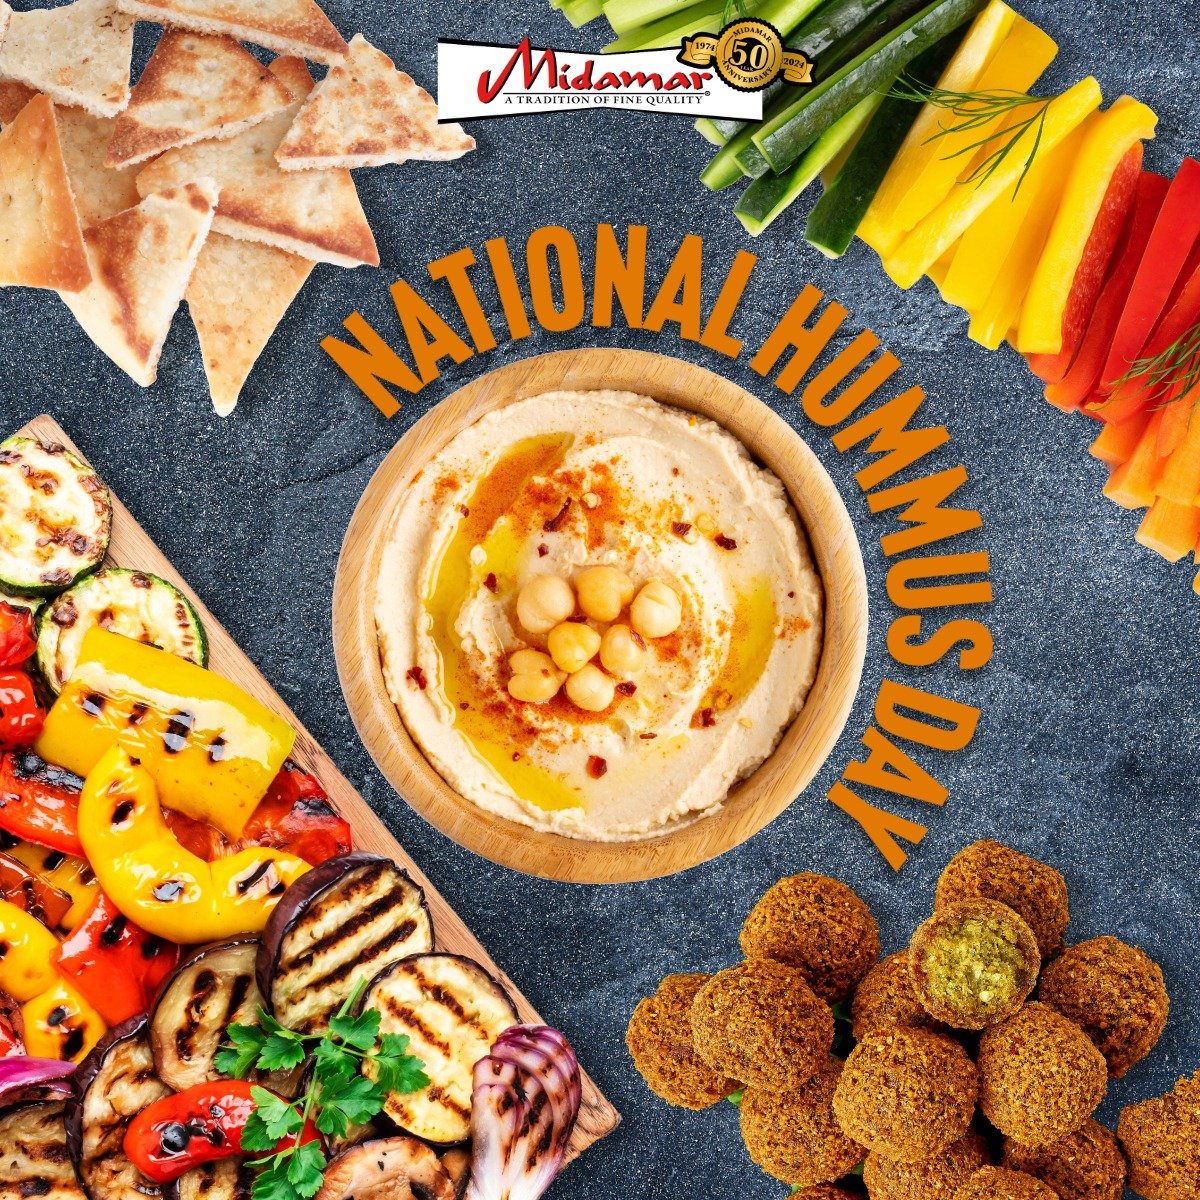 Happy National Hummus Day! We're curious: when it comes to hummus, what's your dipping companion of choice?	

#MidamarHalal #Halal #Hummus #NationalHummusDay